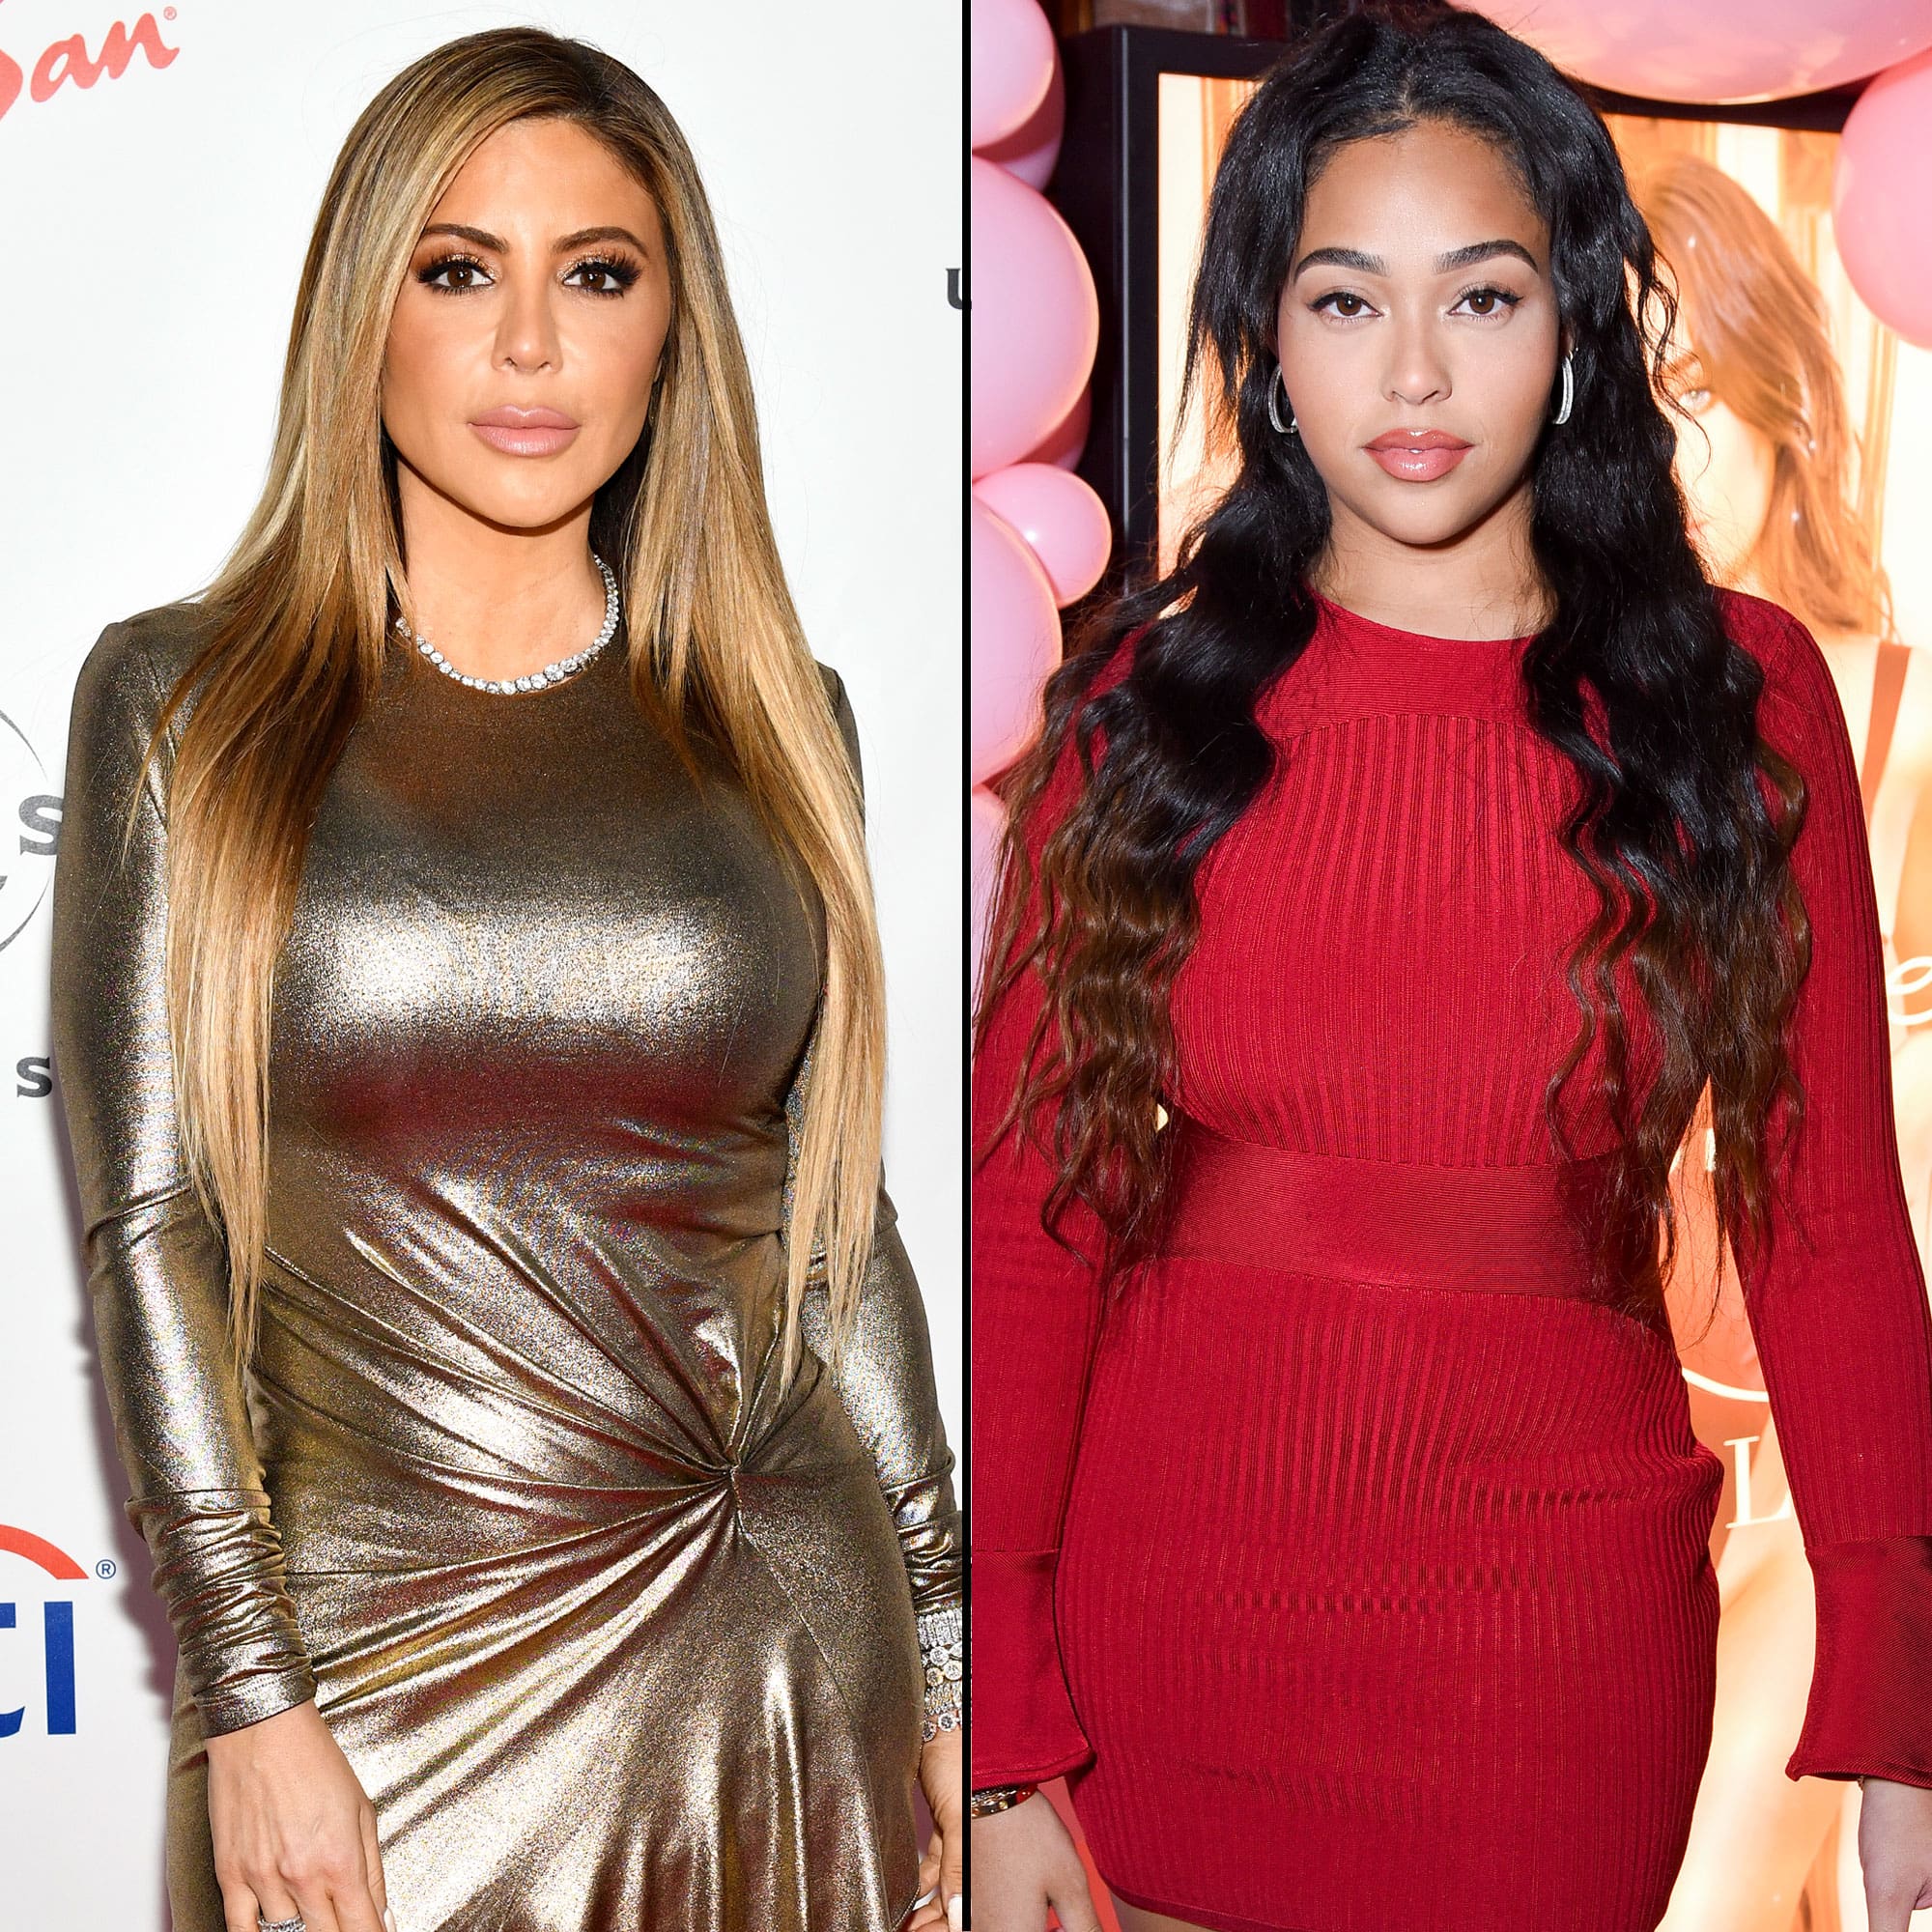 Khloe Kardashian's Friend, Larsa Pippen Shades Jordyn Woods As She Gets Ready To Spill The Tea On The Cheating Drama